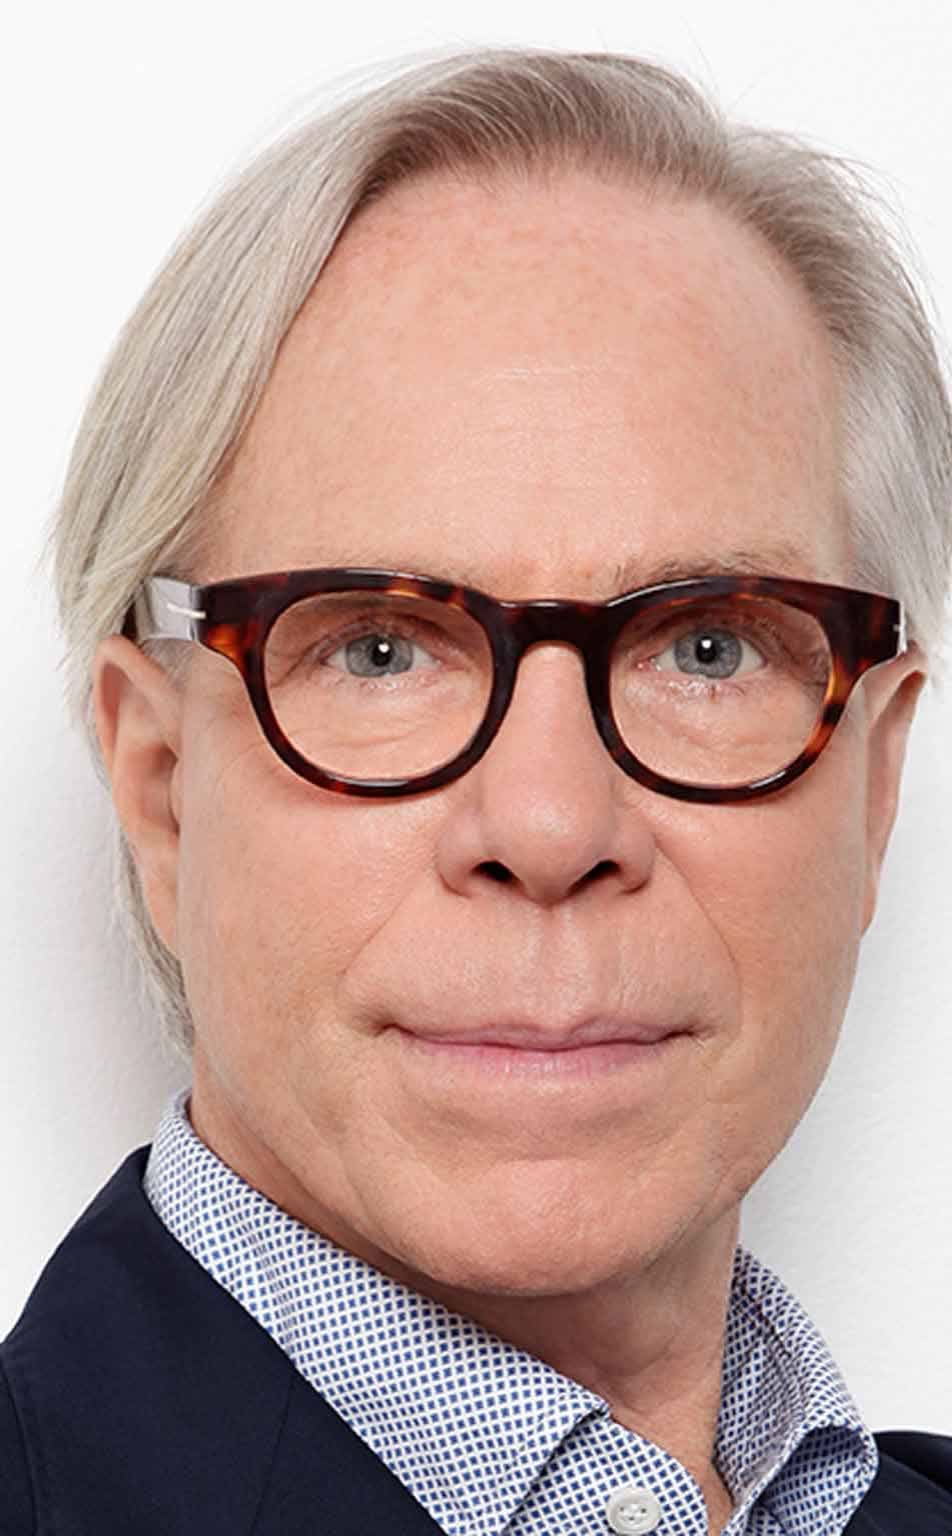 Tommy Hilfiger - Age, Bio, Weight, Facts and Family